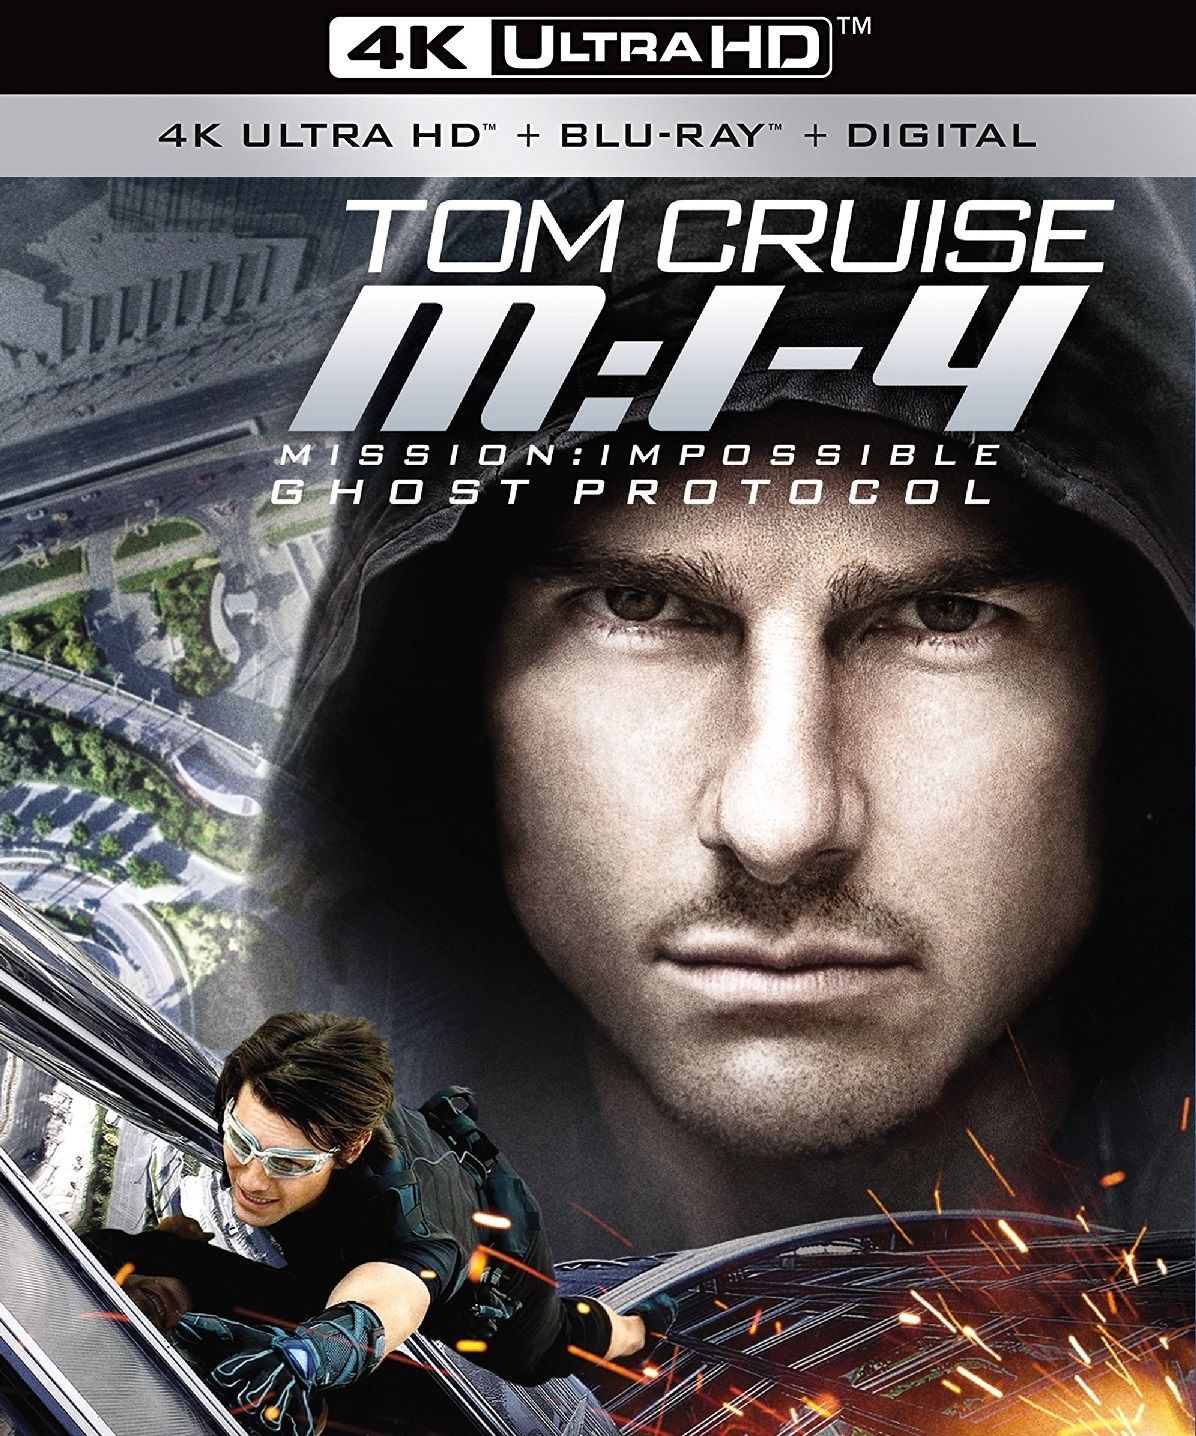 mission impossible 5 full movie in hindi download 720p filmywap